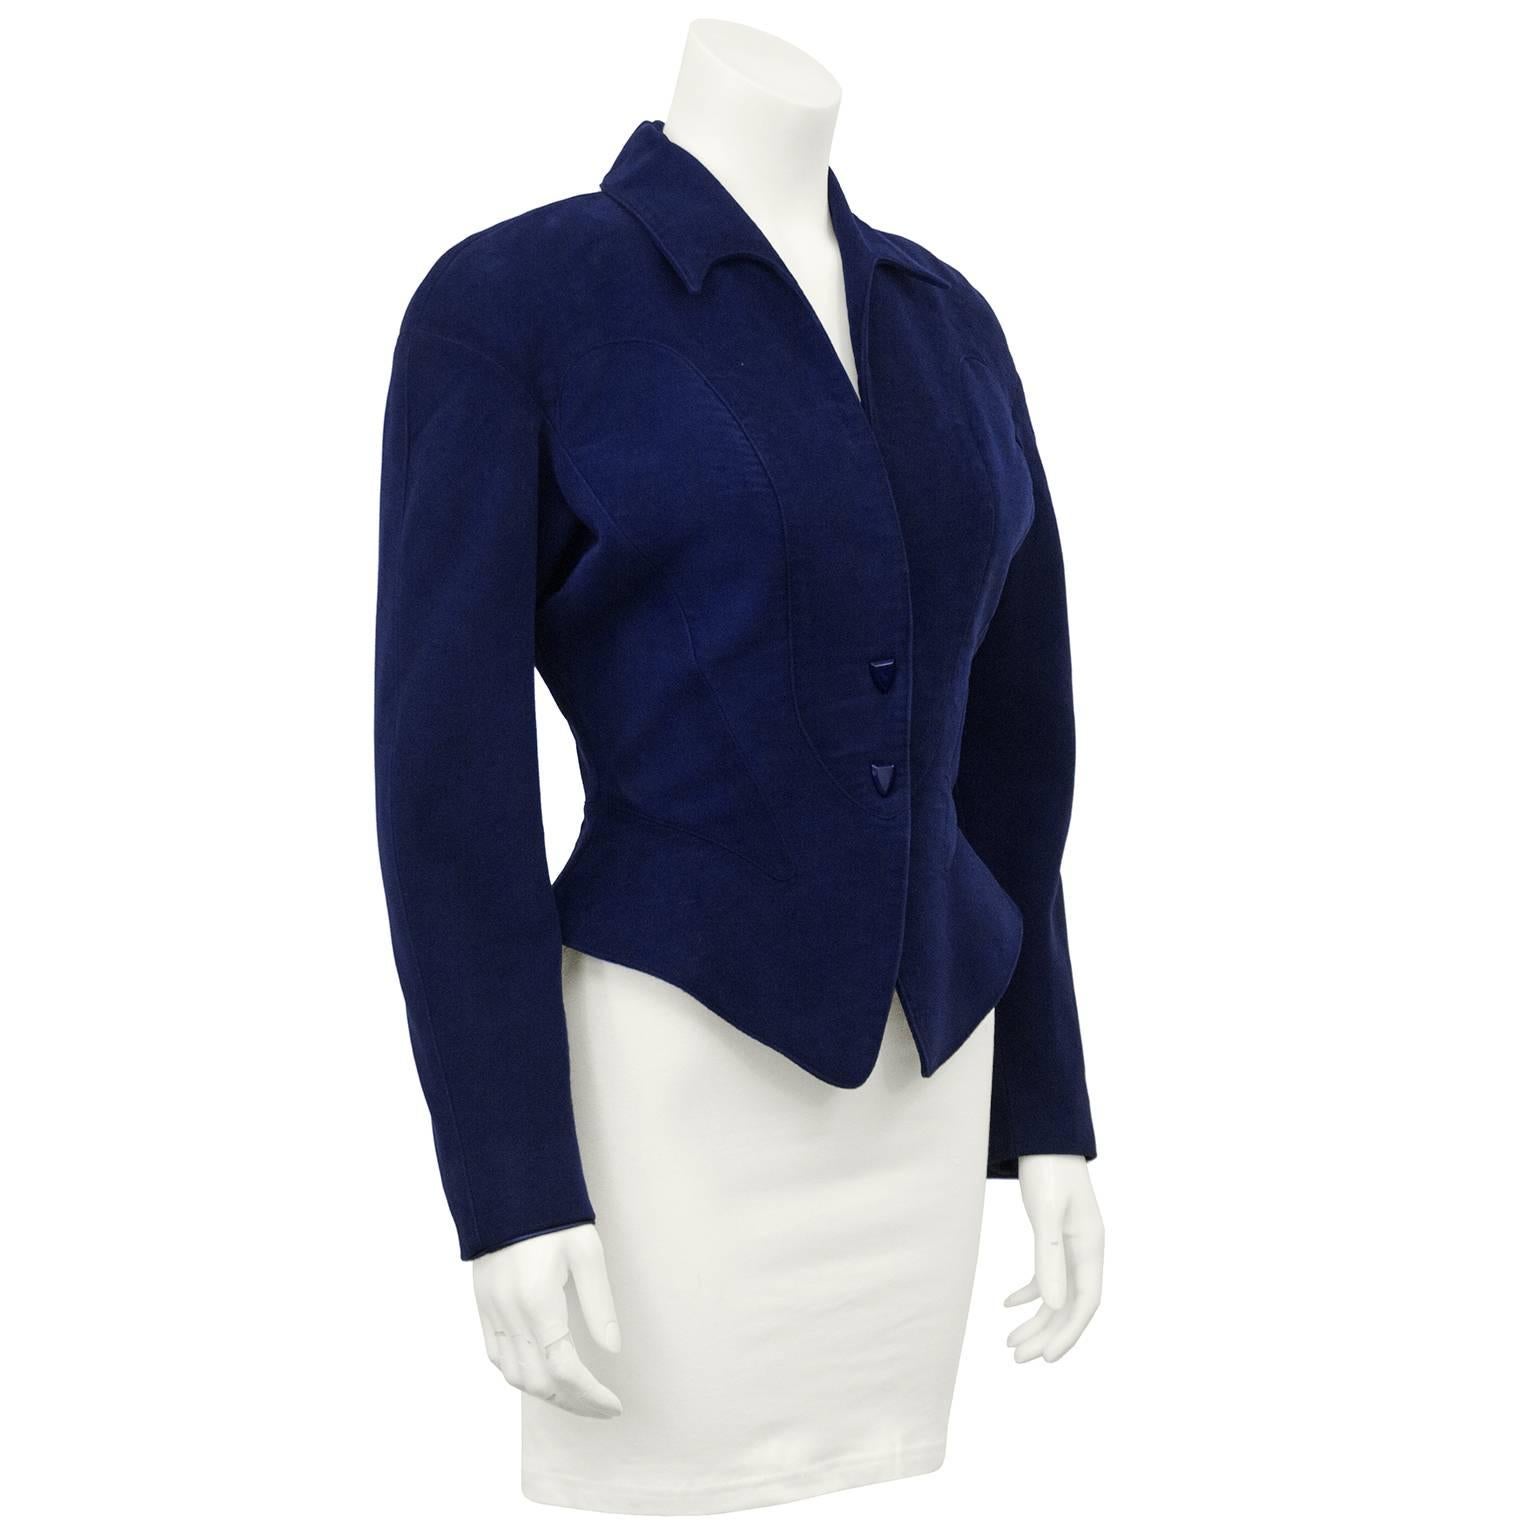 Super sexy and flattering Thierry Mugler navy cotton velvet jacket from the 1980s. Known for making clothing that hugged every curve of a woman's body, Mugler's pieces are effortless and chic as well as sophisticated. This beautiful jacket is in his